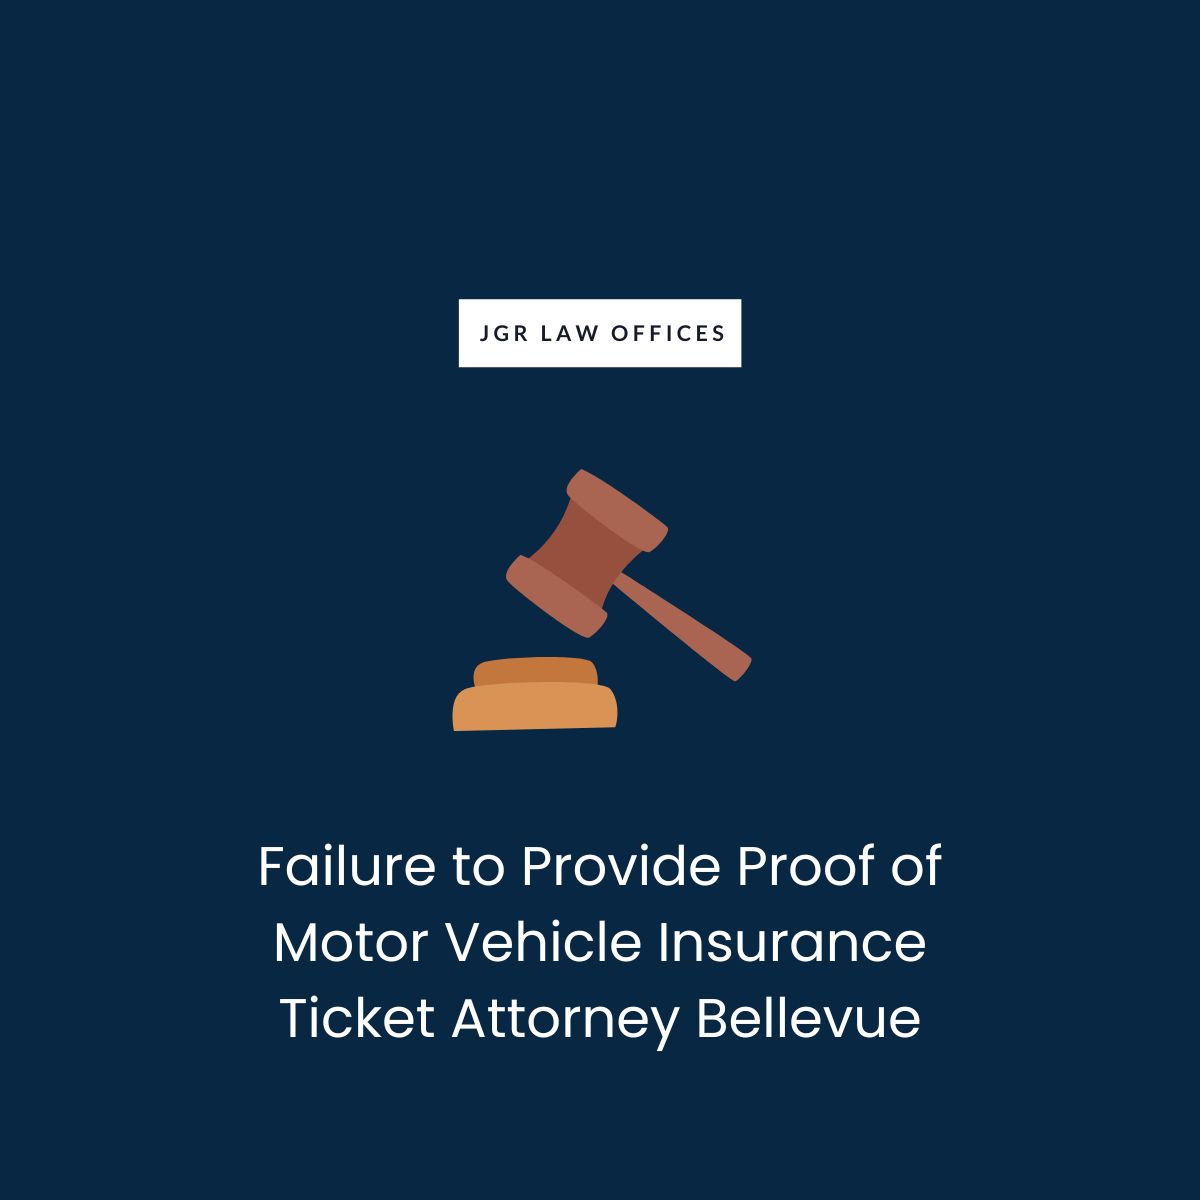 Failure to Provide Proof of Motor Vehicle Insurance Ticket Attorney Bellevue